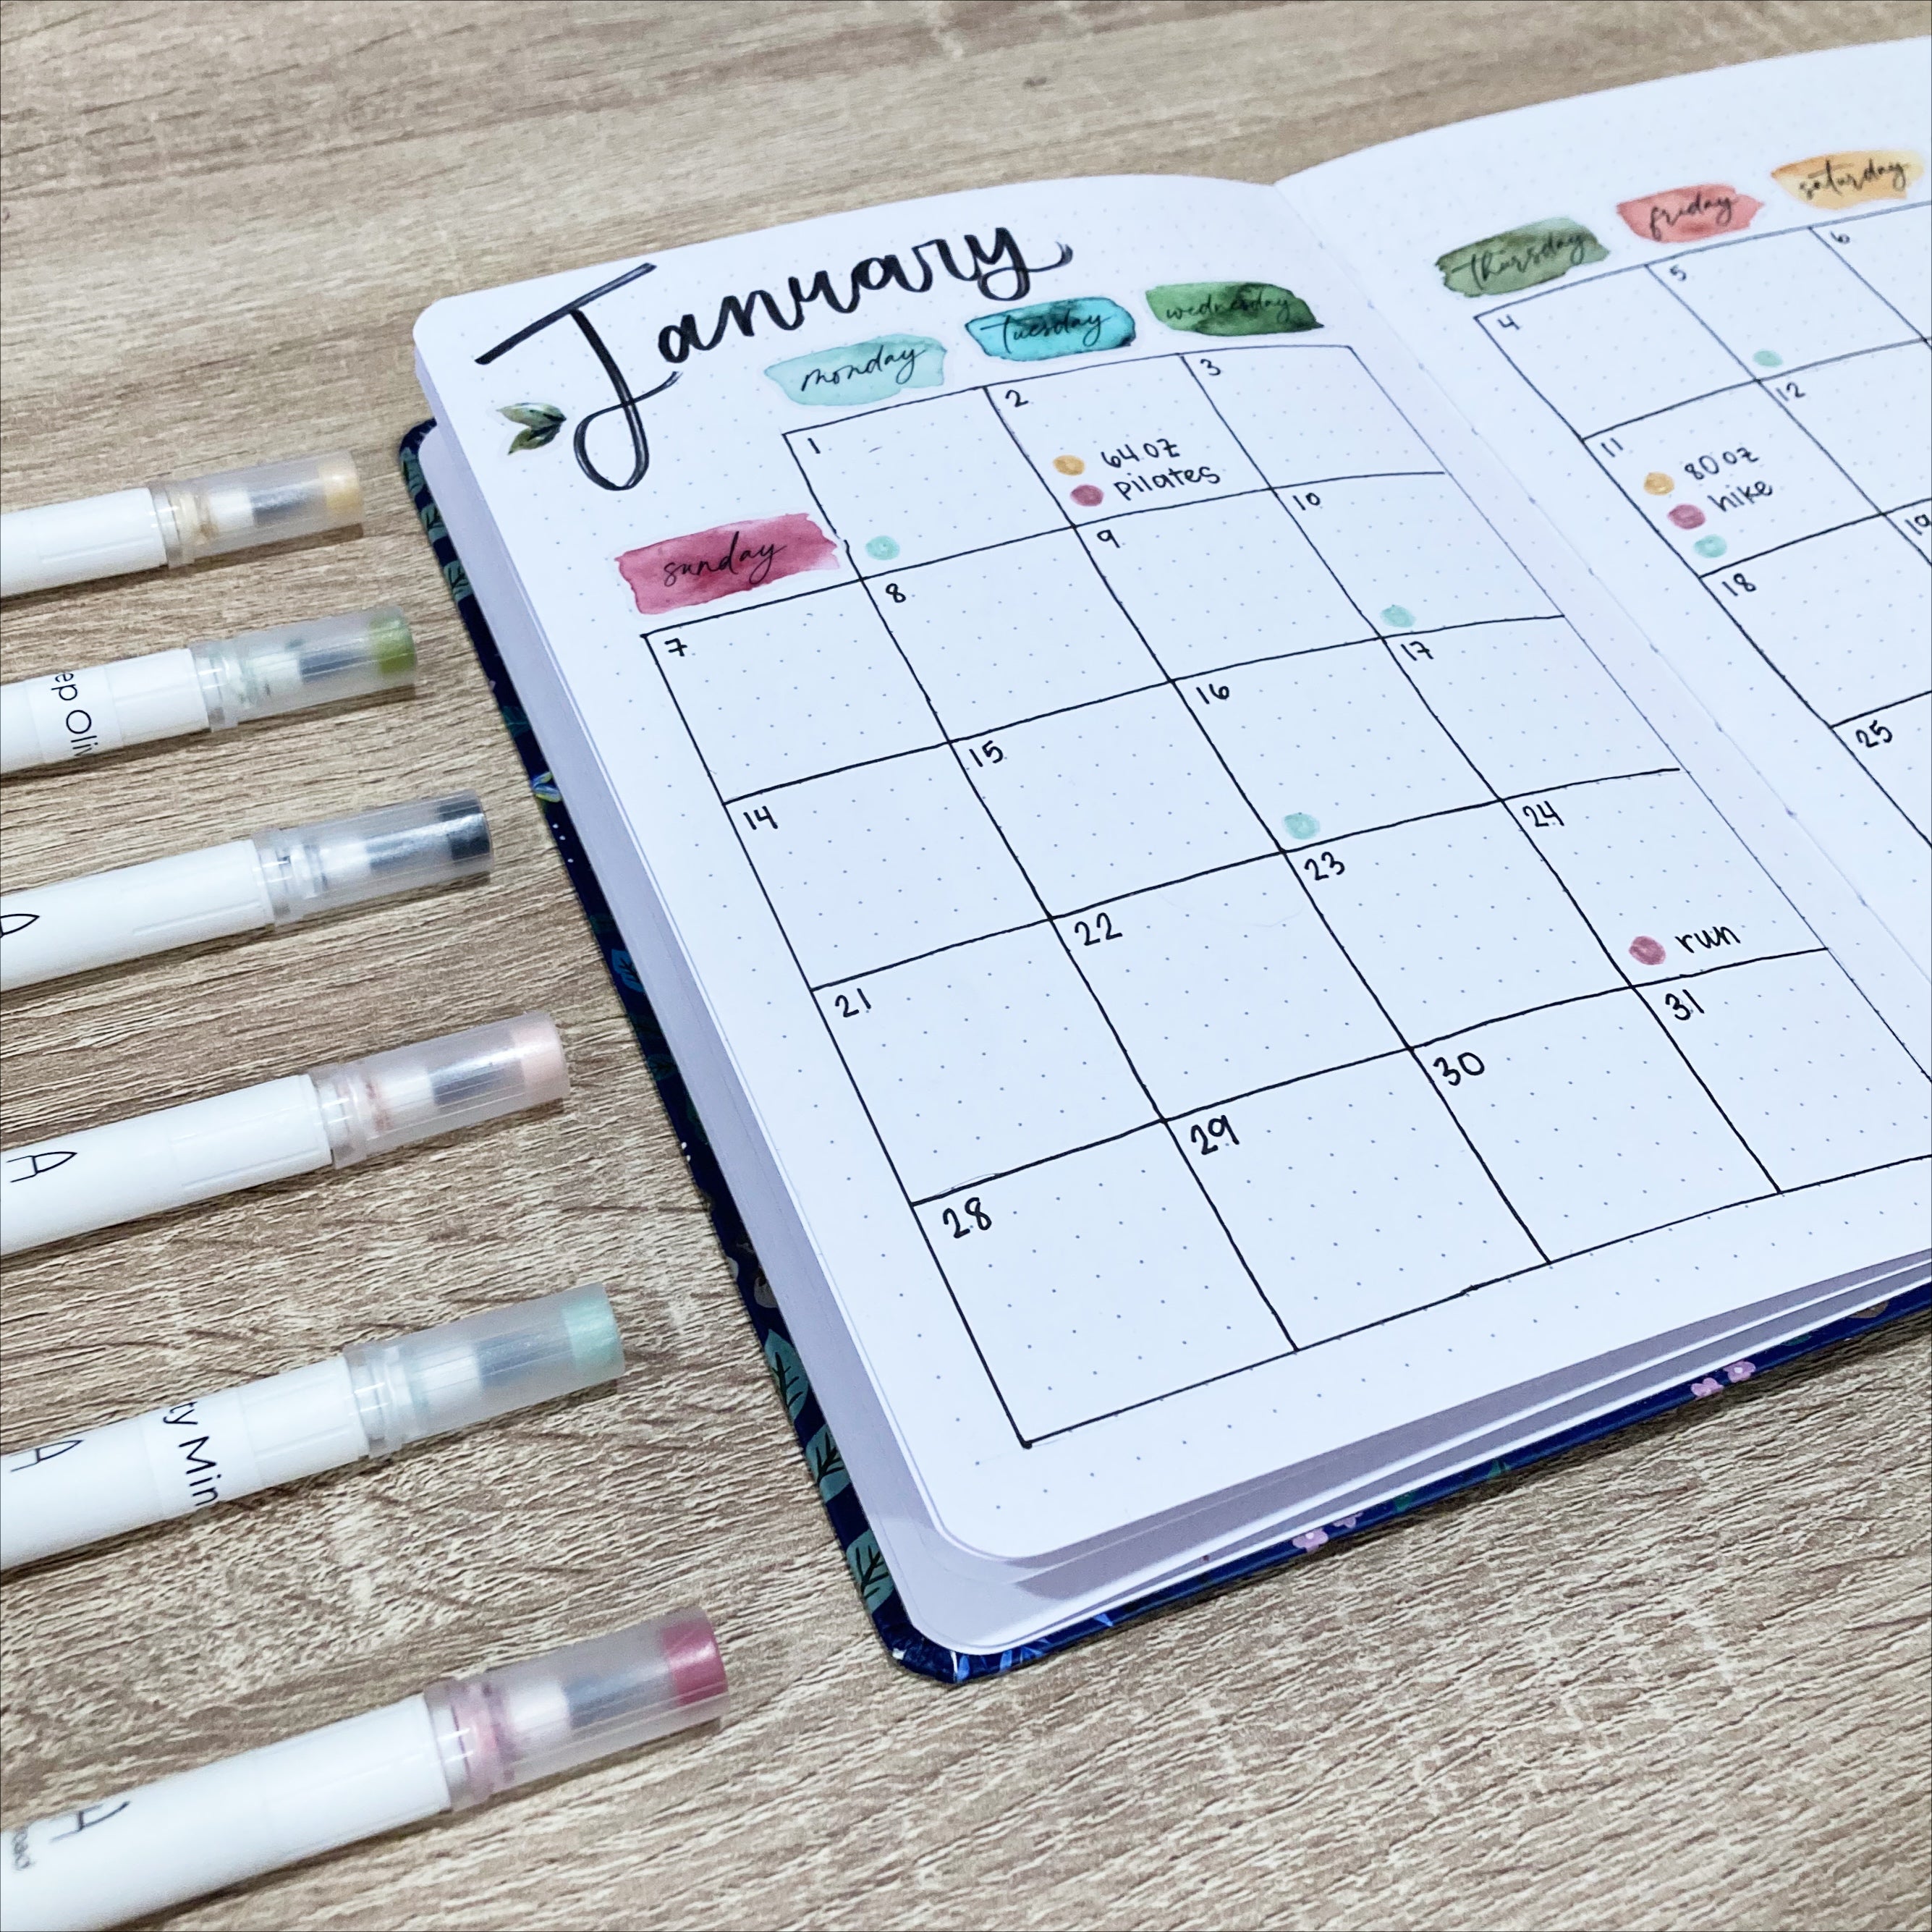 4 Simple Spreads to Jump Start your Wellness Bullet Journal Journey